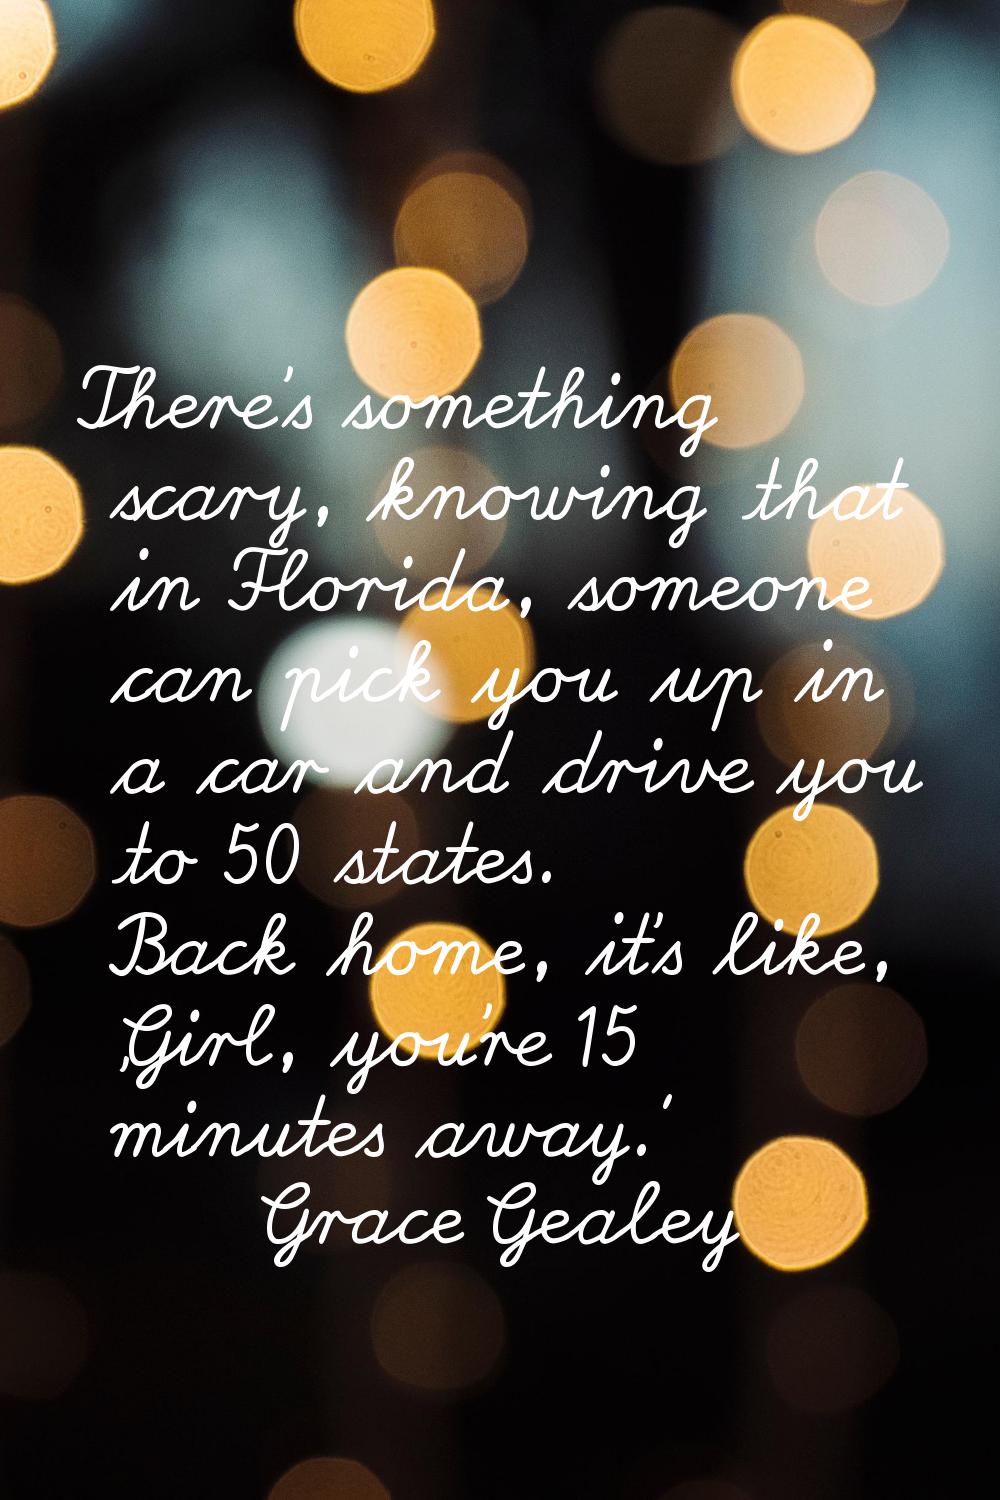 There's something scary, knowing that in Florida, someone can pick you up in a car and drive you to